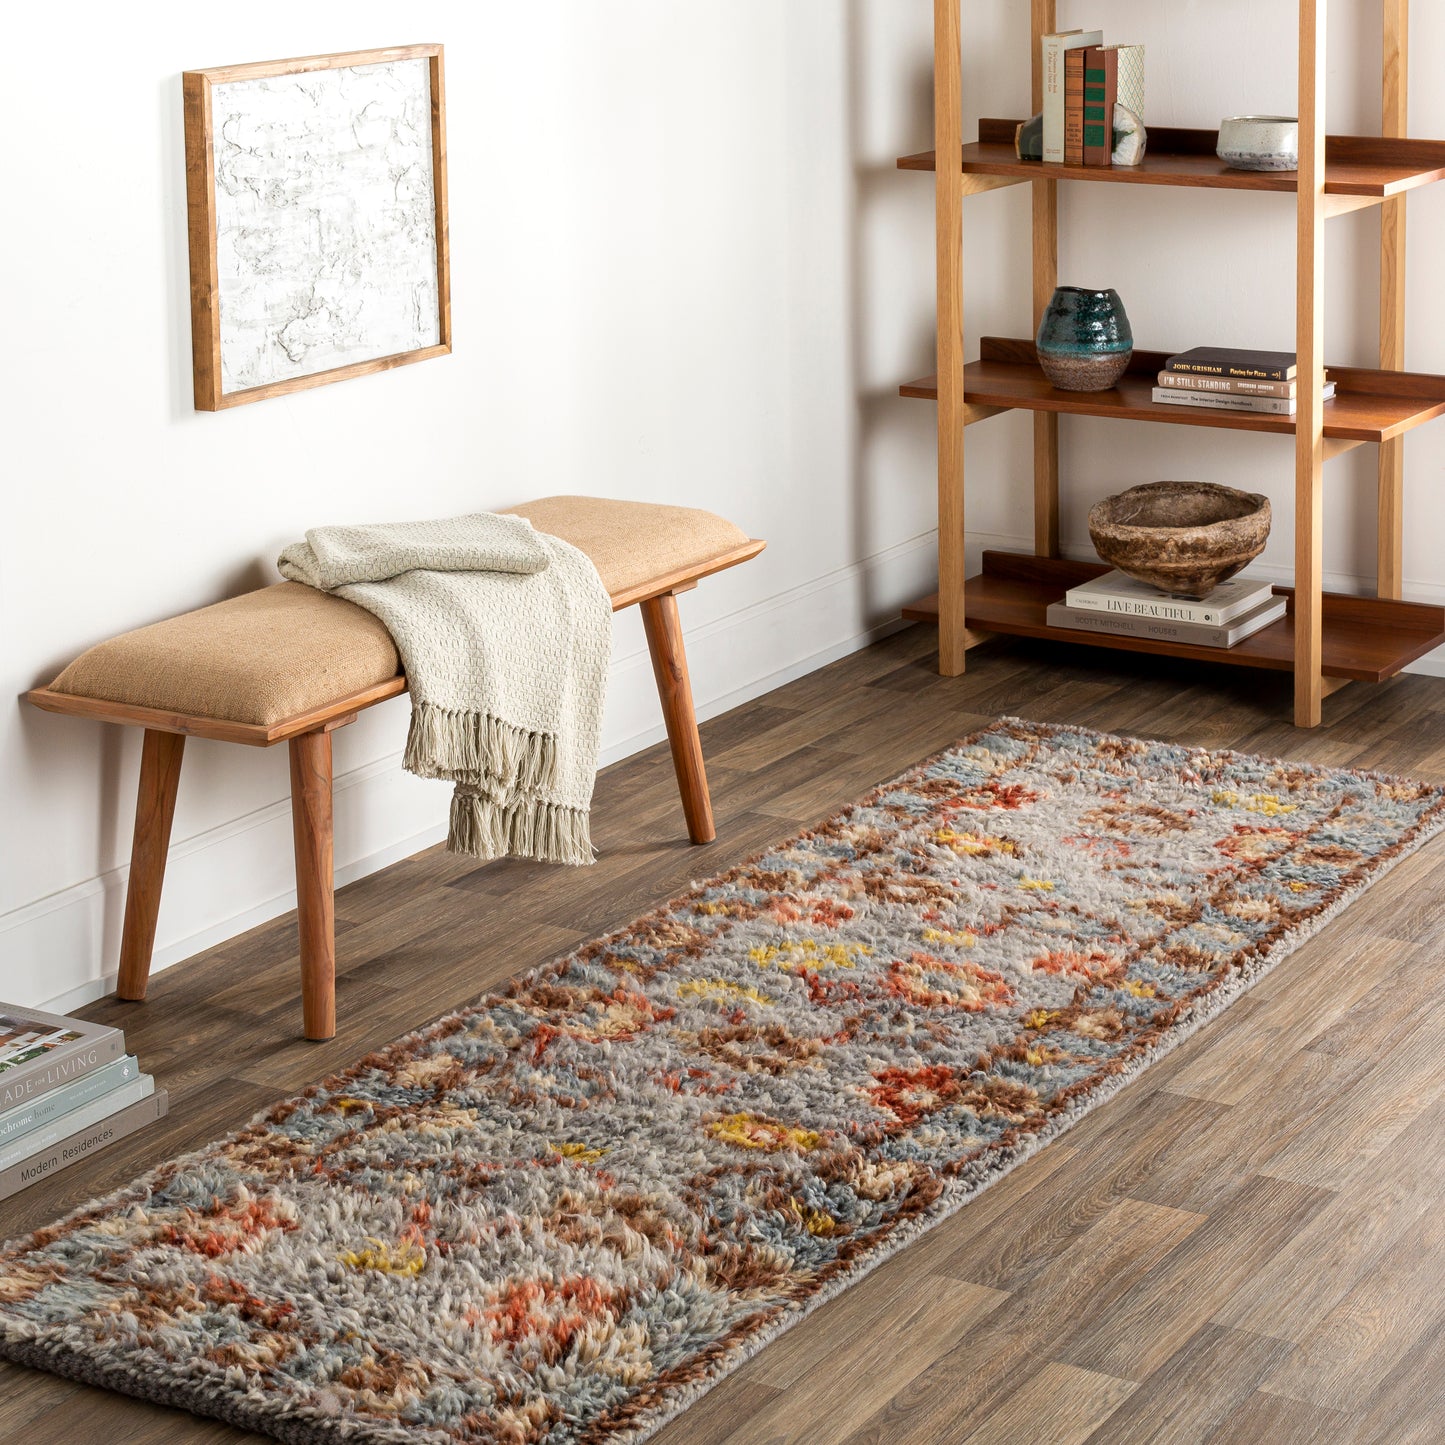 Marrakech 29599 Hand Knotted Wool Indoor Area Rug by Surya Rugs